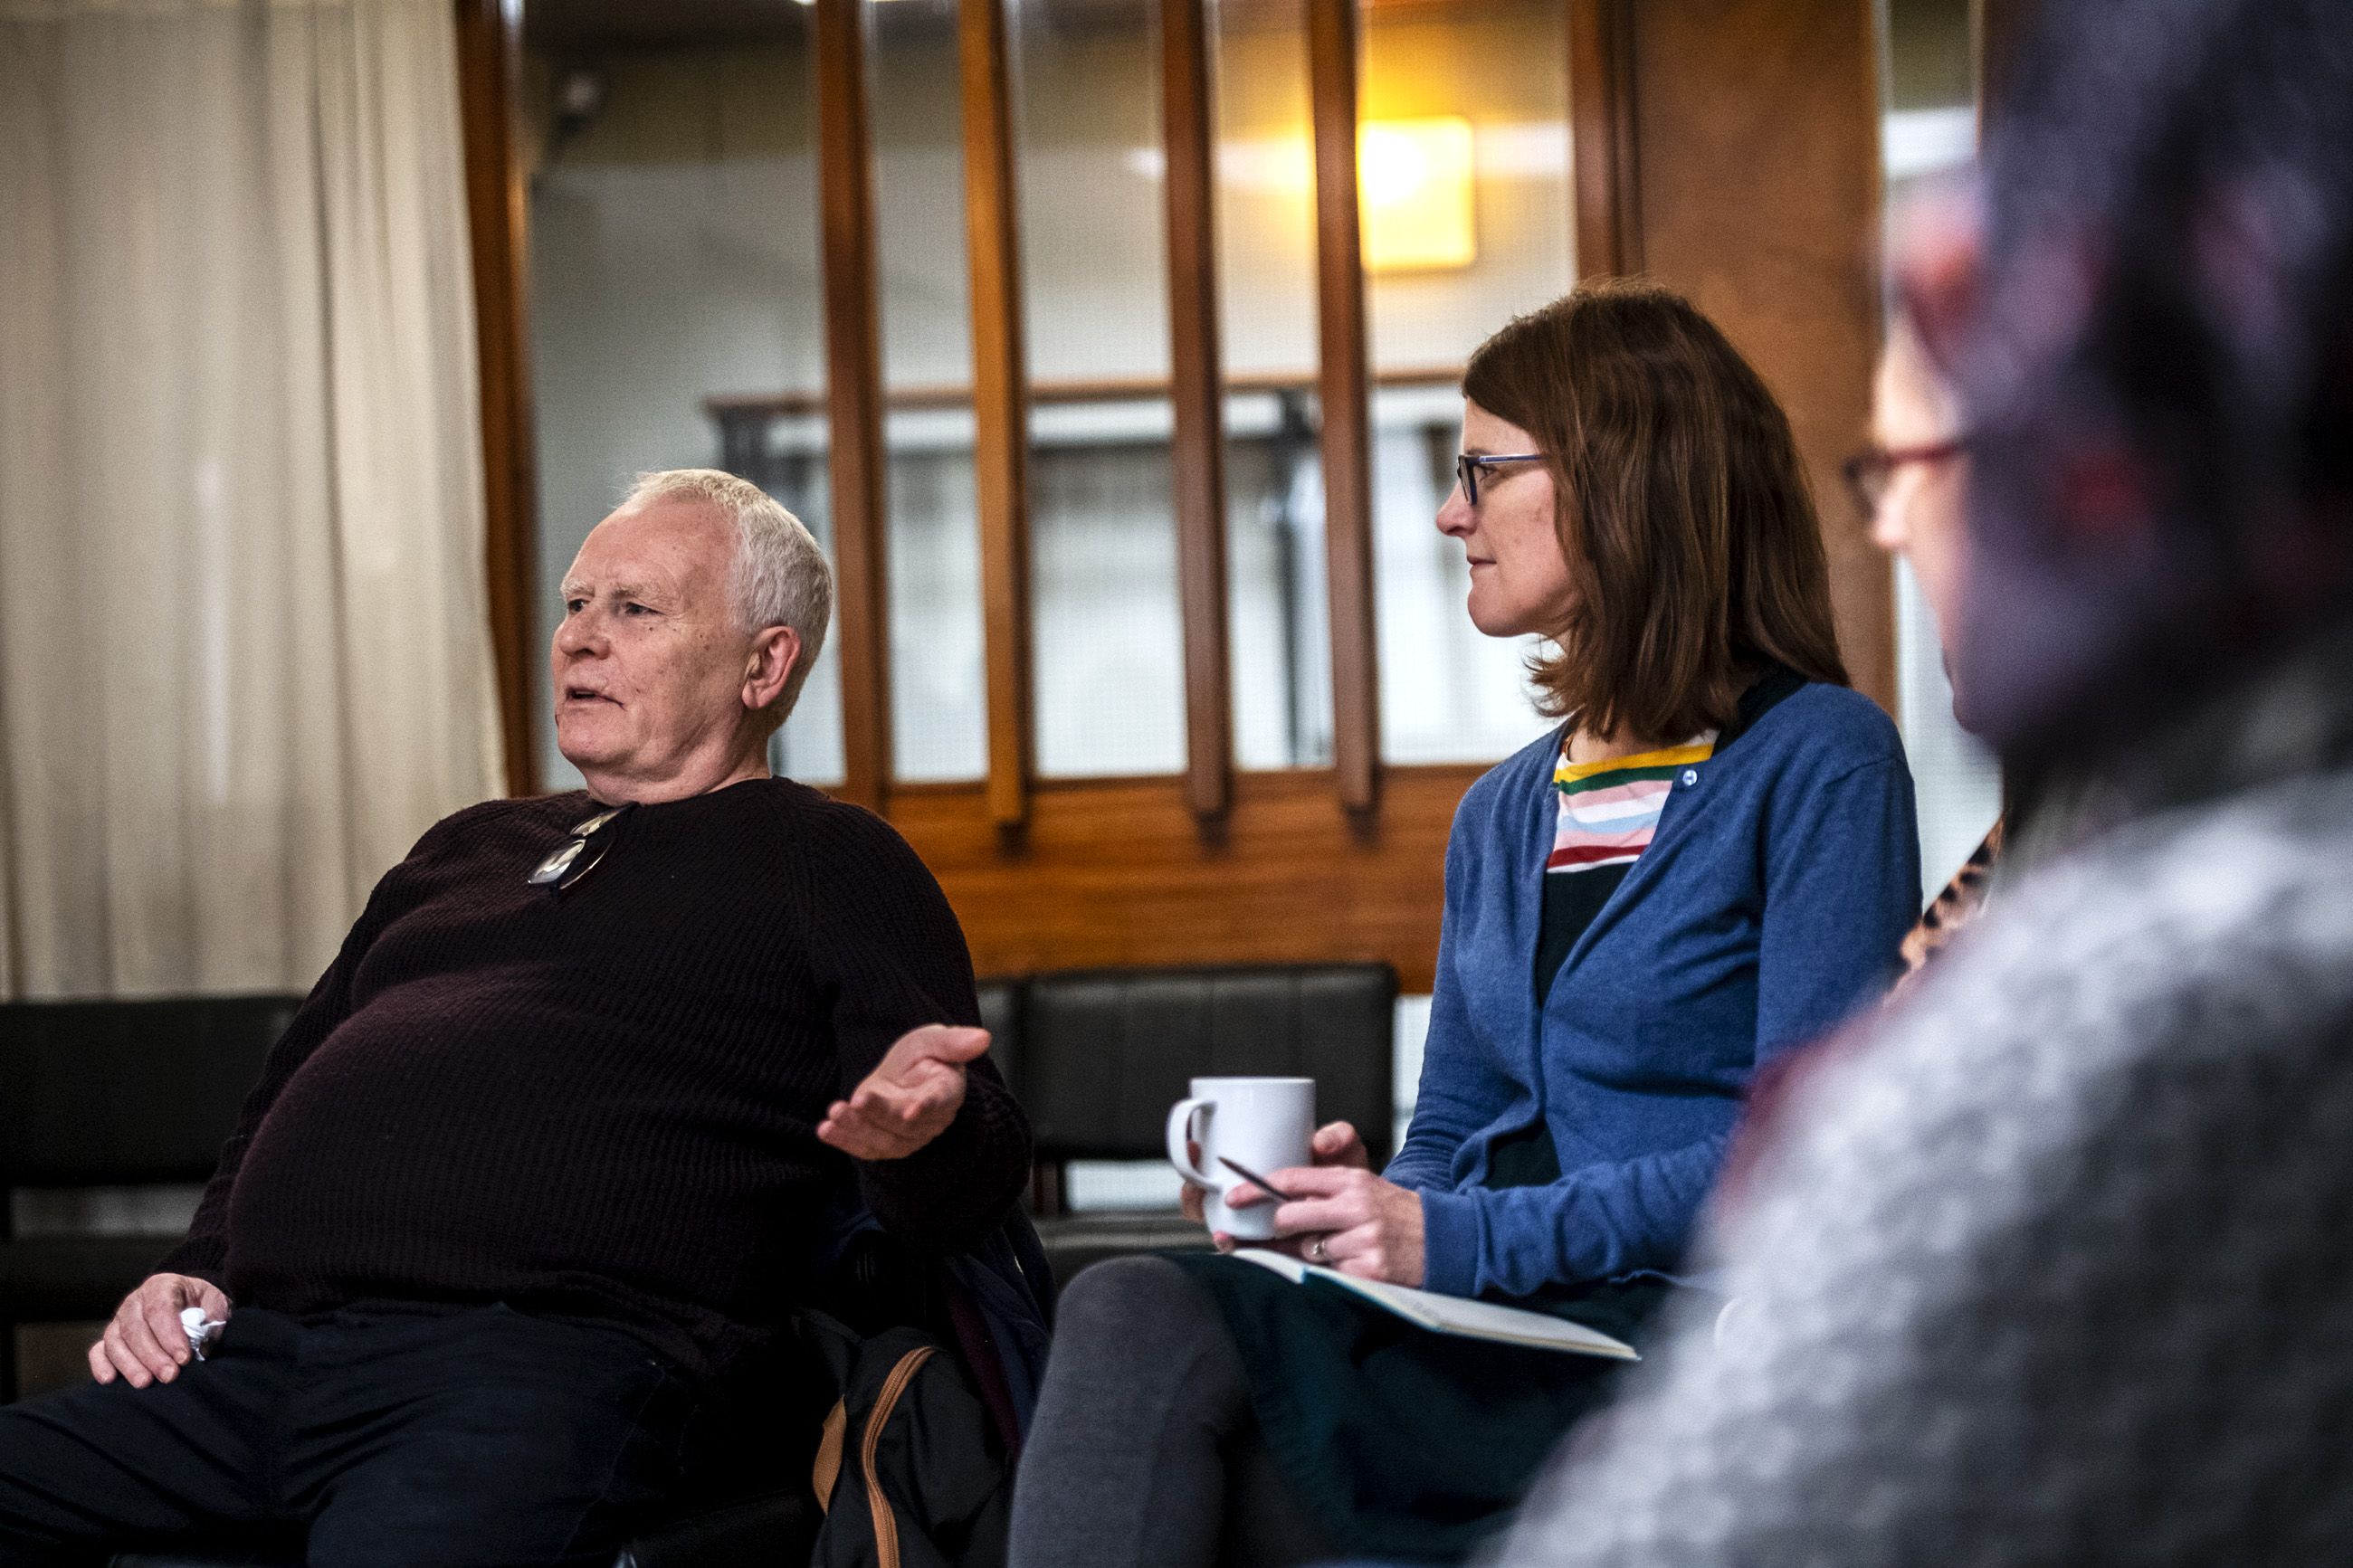 Pat Martin, of Possilpark, a neighborhood of Glasgow, left, speaks during the monthly Poverty Truth Community meeting as Elaine Downie, coordinator of the Poverty Truth Community, listens. Image by Michael Santiago. United Kingdom, 2019.